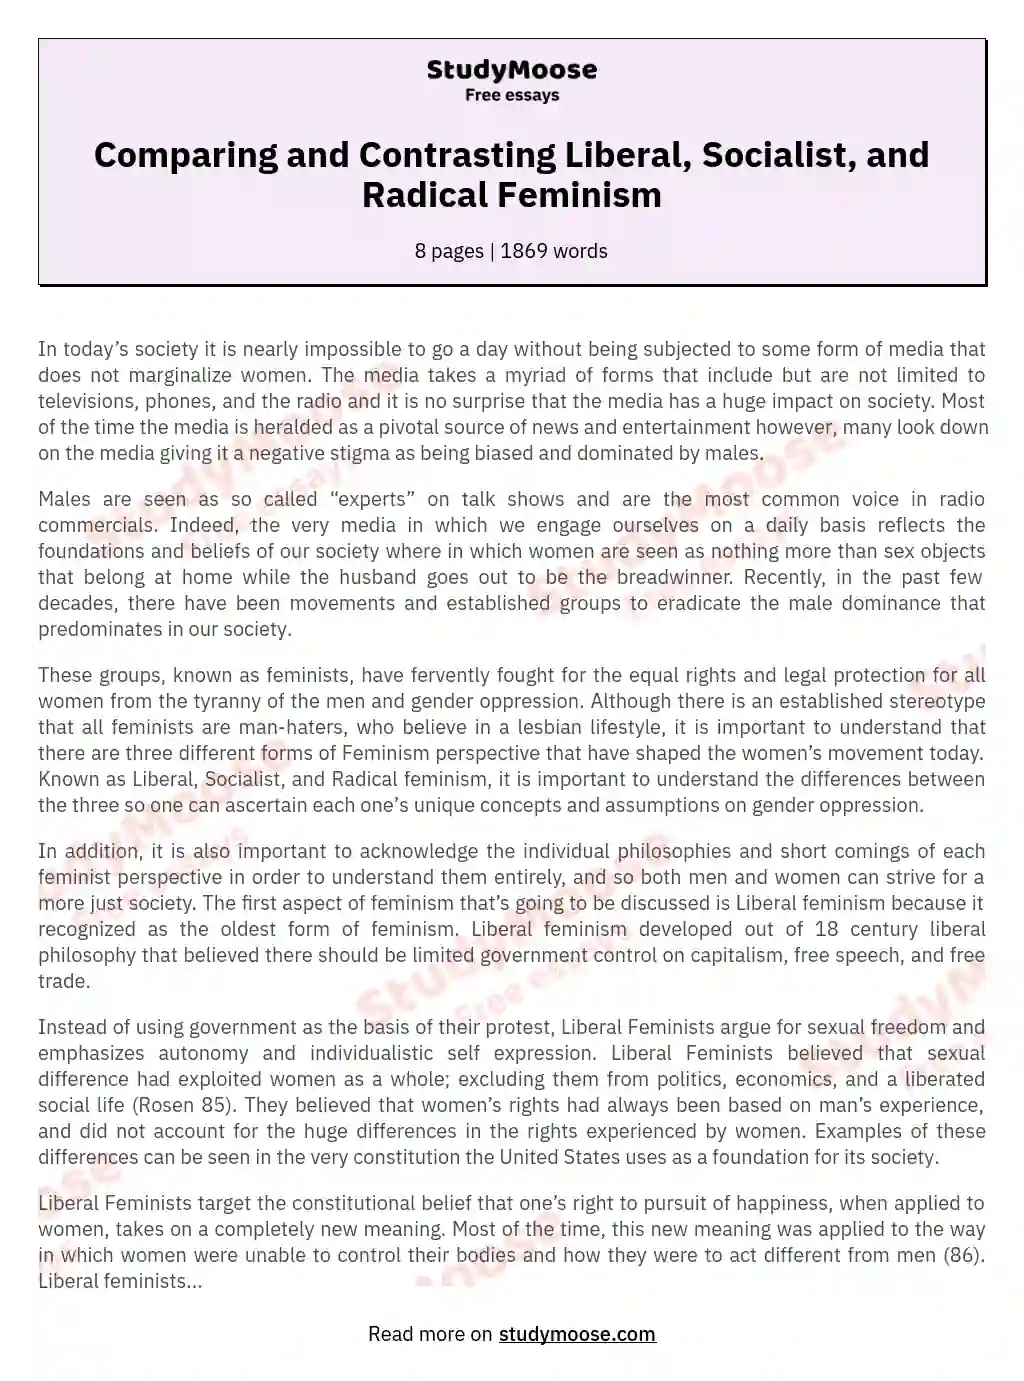 Comparing and Contrasting Liberal, Socialist, and Radical Feminism